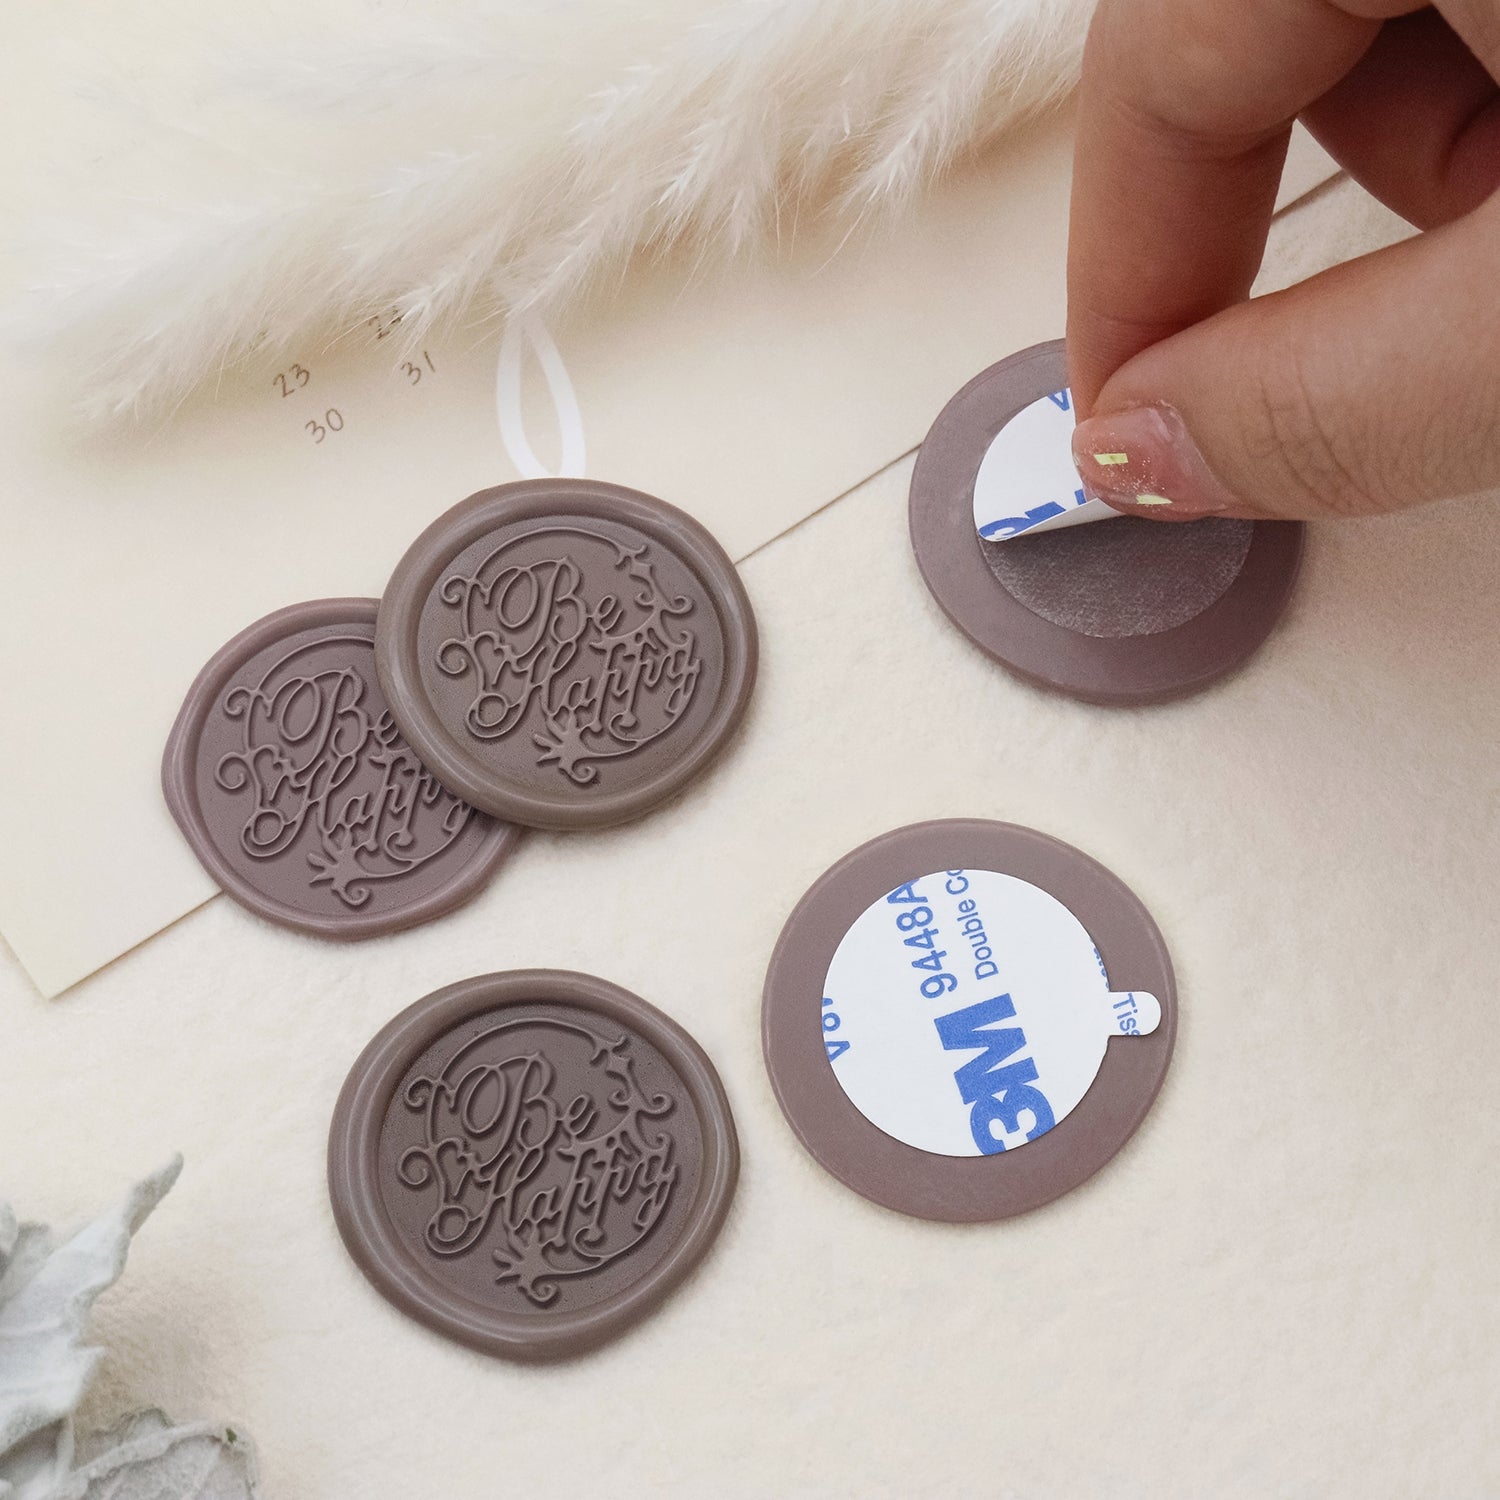 Greeting Self-adhesive Wax Seal Stickers - Be Happy 2